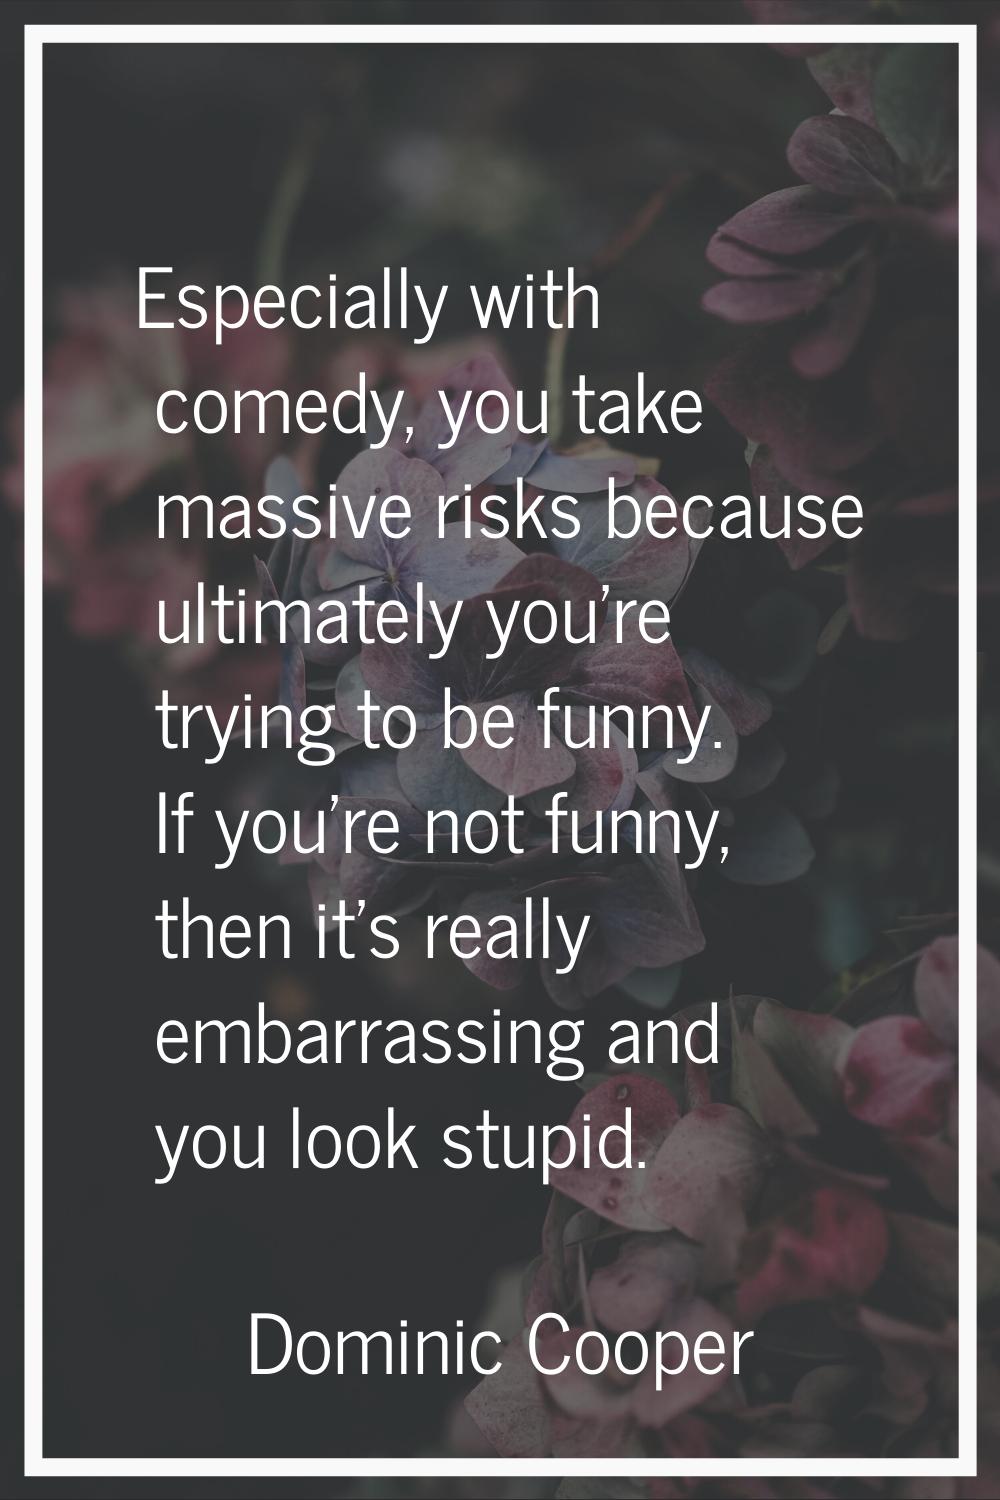 Especially with comedy, you take massive risks because ultimately you're trying to be funny. If you